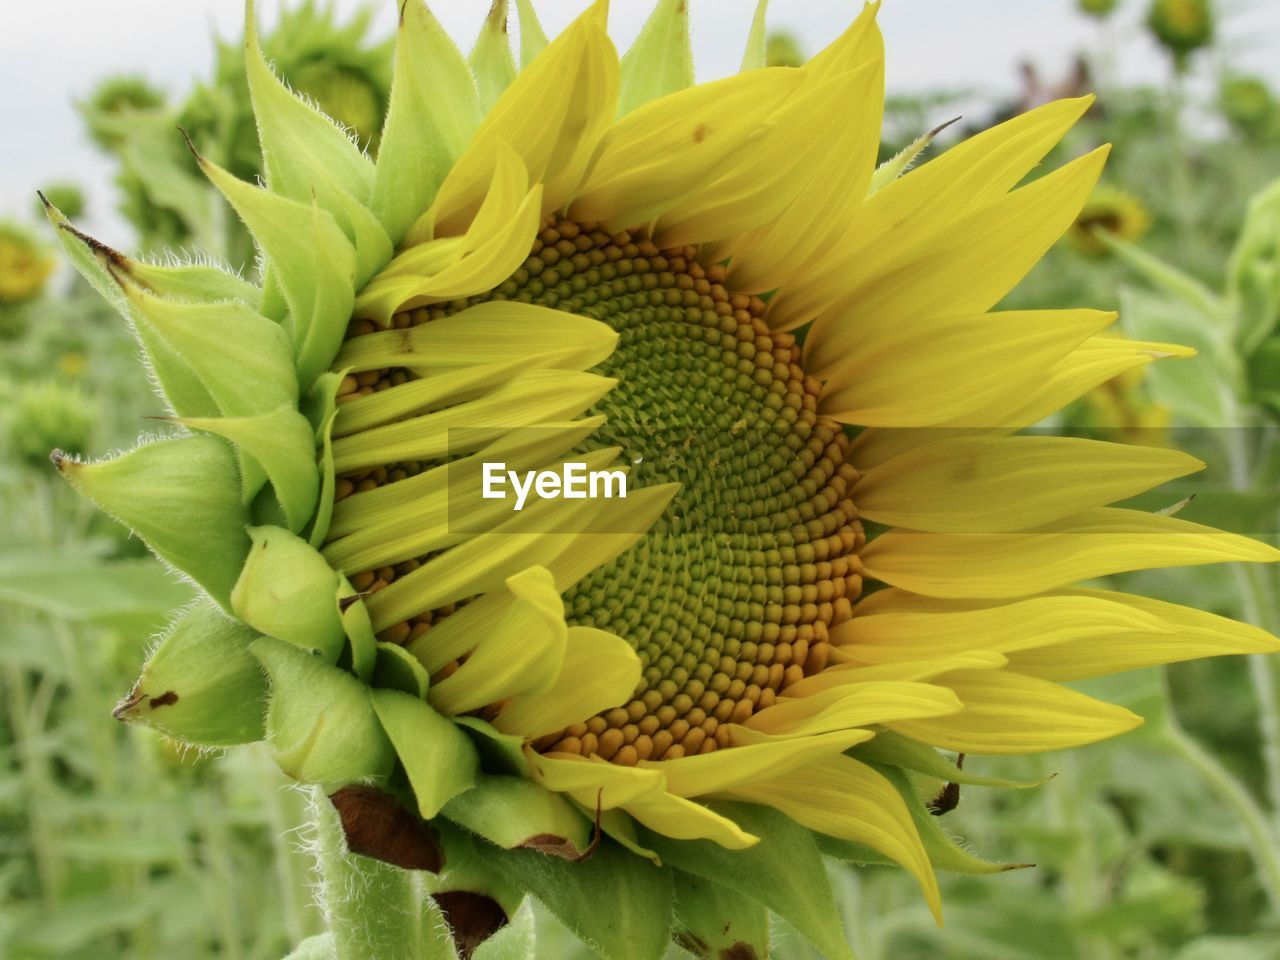 plant, sunflower, flower, flowering plant, freshness, beauty in nature, growth, nature, yellow, close-up, flower head, sunflower seed, petal, field, inflorescence, green, no people, fragility, agriculture, plant part, leaf, focus on foreground, food, asterales, land, outdoors, landscape, environment, rural scene, food and drink, crop, day, blossom, summer, springtime, botany, pollen, produce